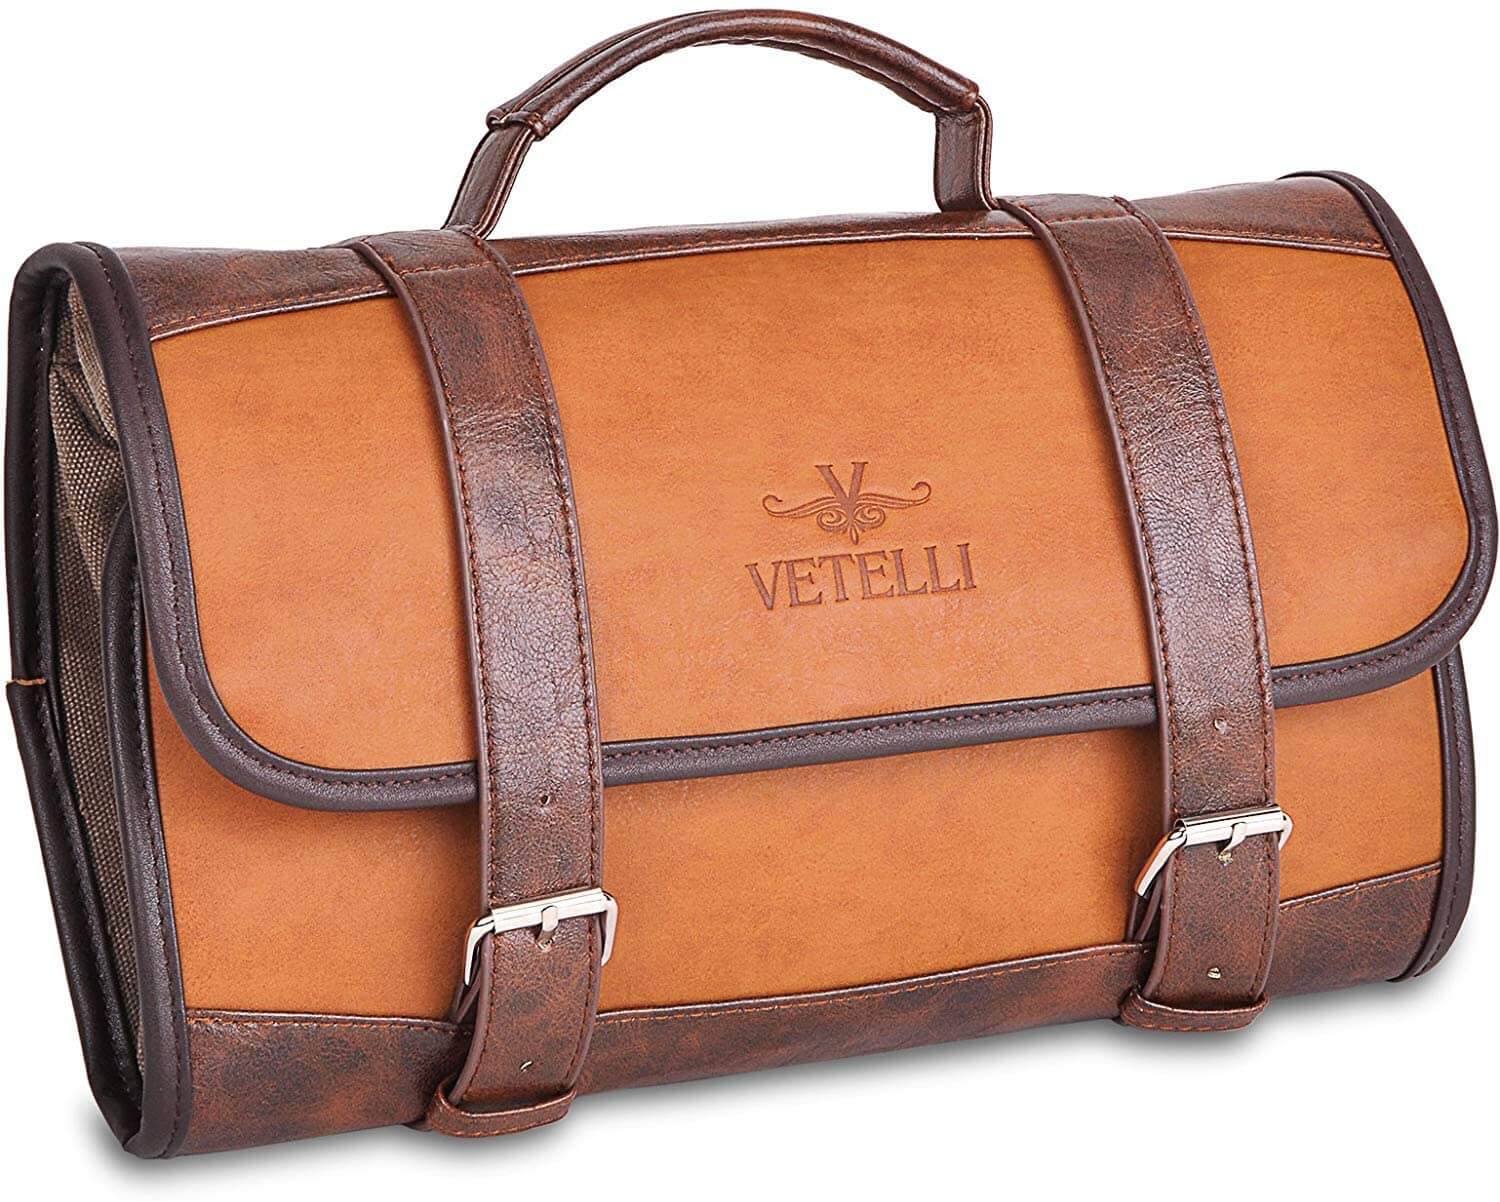 Mens Travel Toiletry Bag Leather: Ultimate Luxe Packing!